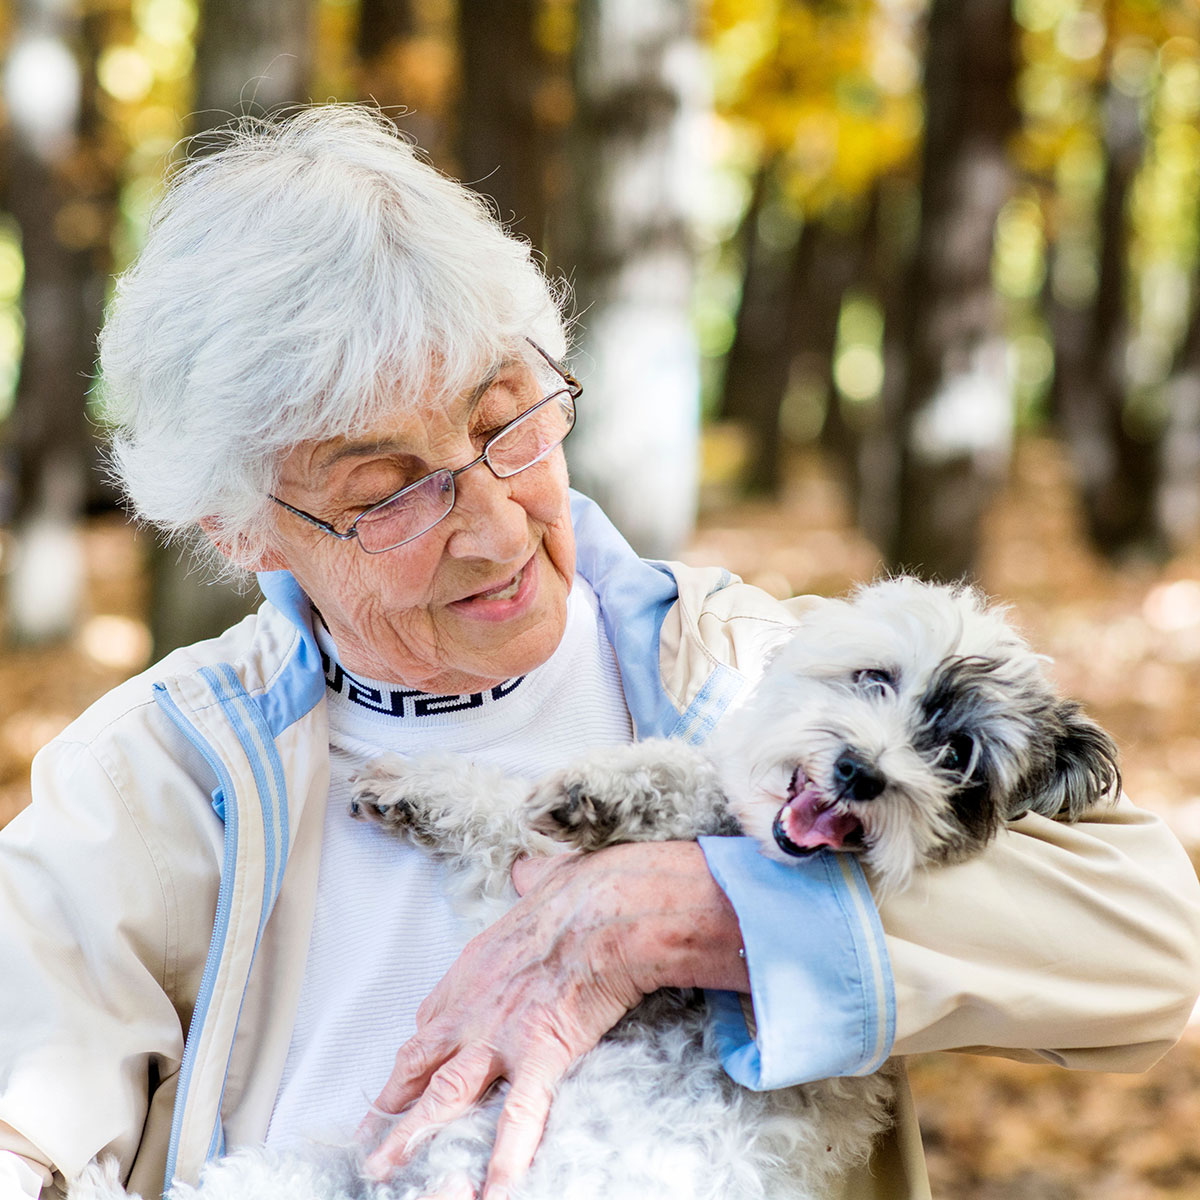 Long-term pet ownership may help older adults retain cognitive skills